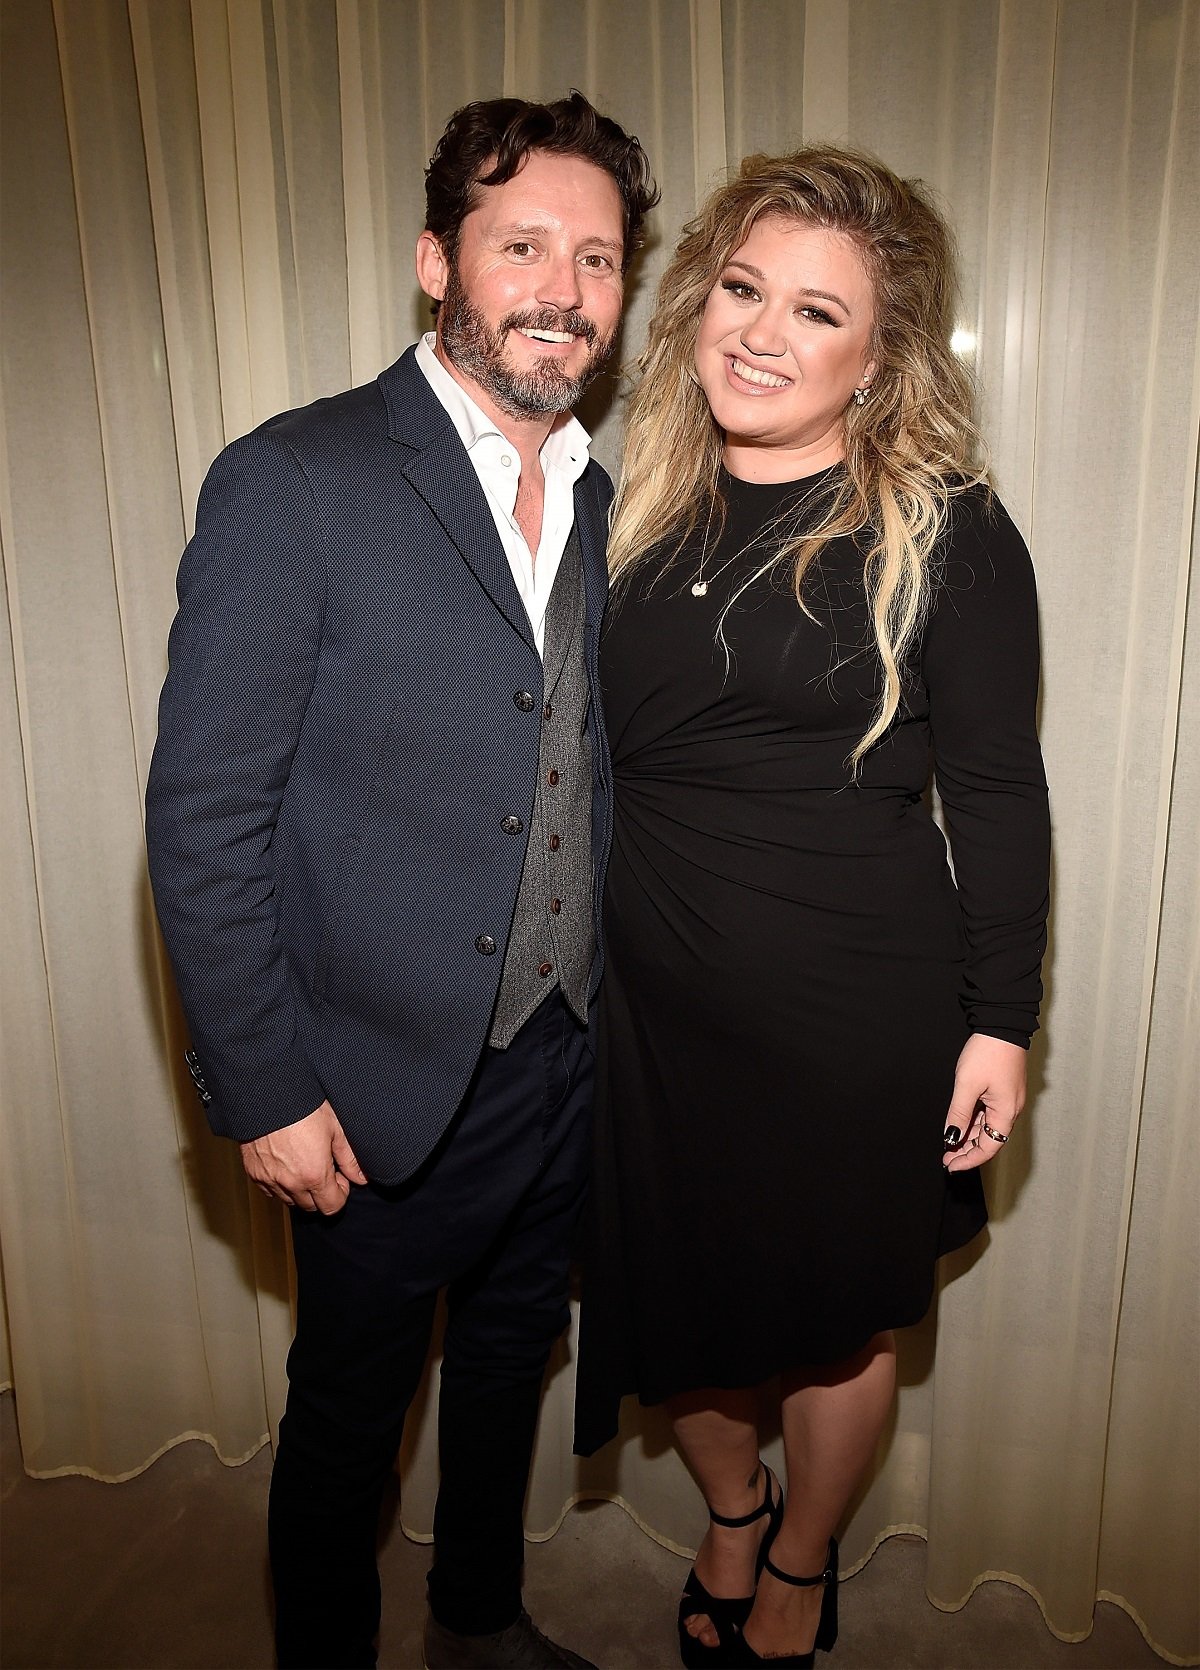 Brandon Blackstock and Kelly Clarkson on September 6, 2017 in New York | Source: Getty Images